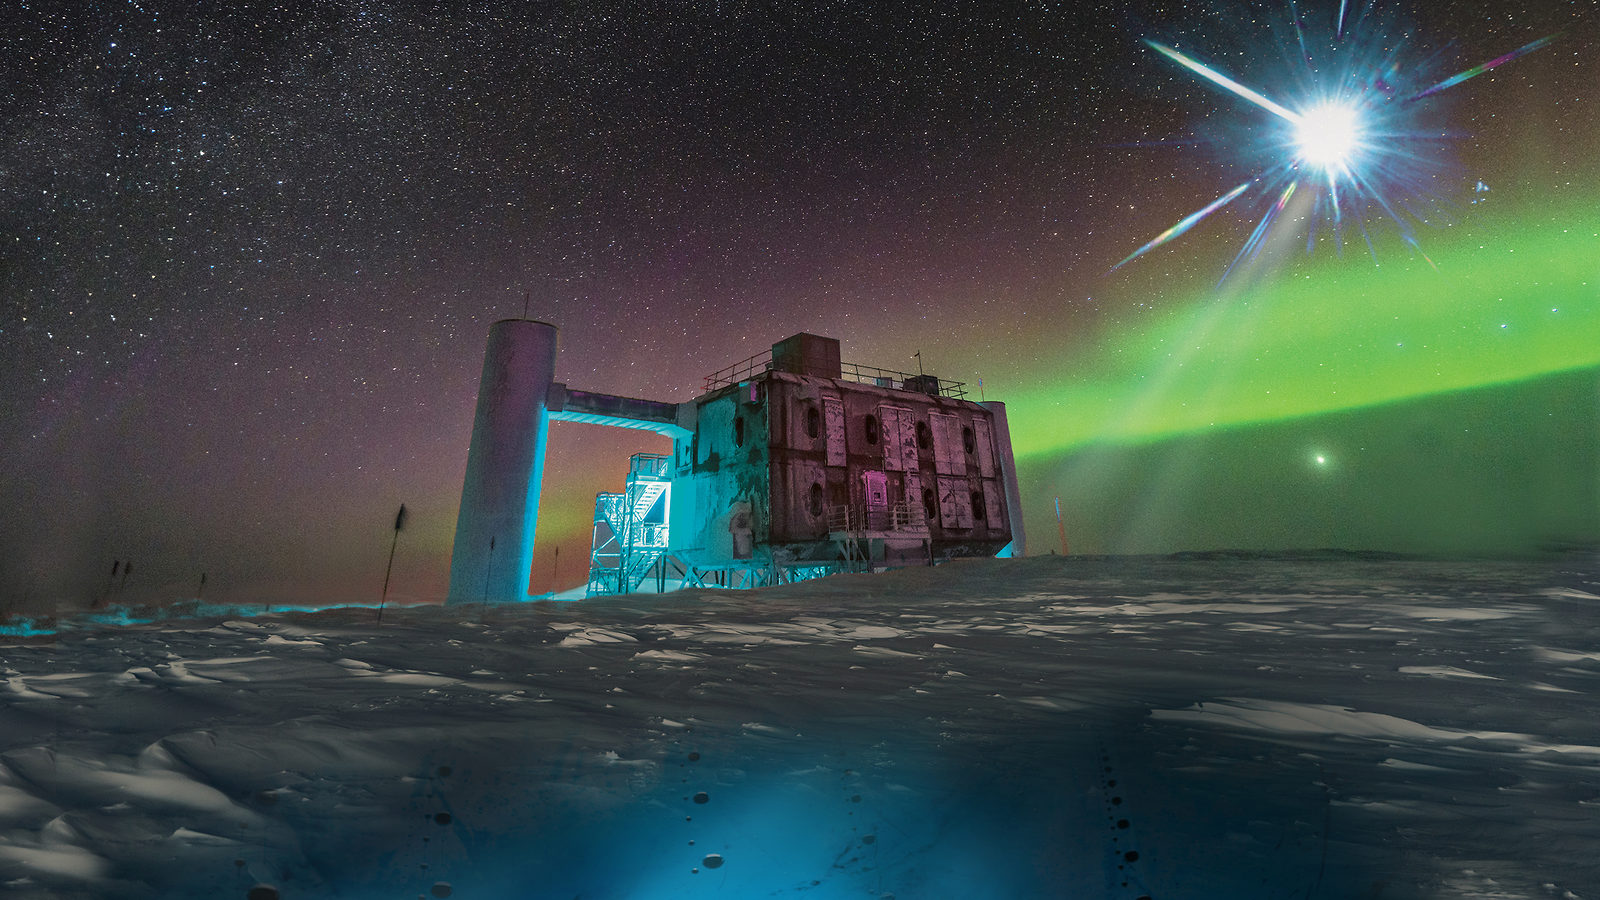 Artistic rendering of the IceCube Lab at the South Pole with a bright flash in the sky.